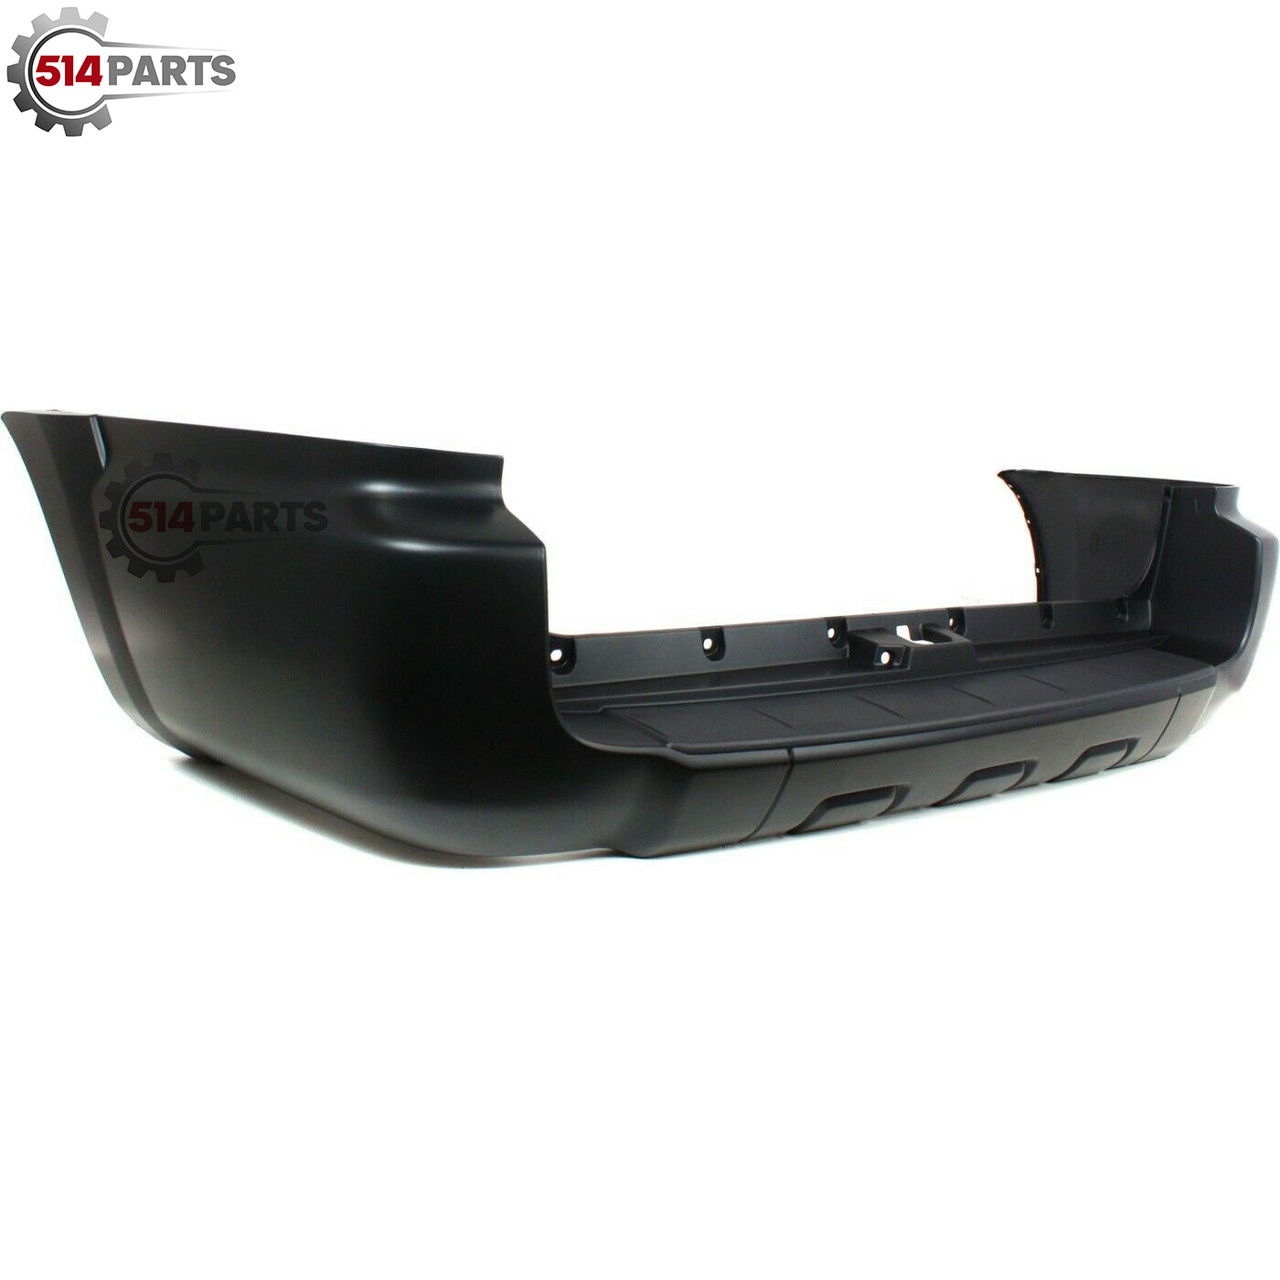 2006 - 2009 TOYOTA 4Runner PRIMED REAR BUMPER COVER without TRAILER HITCH - PARE-CHOC ARRIER PRIME